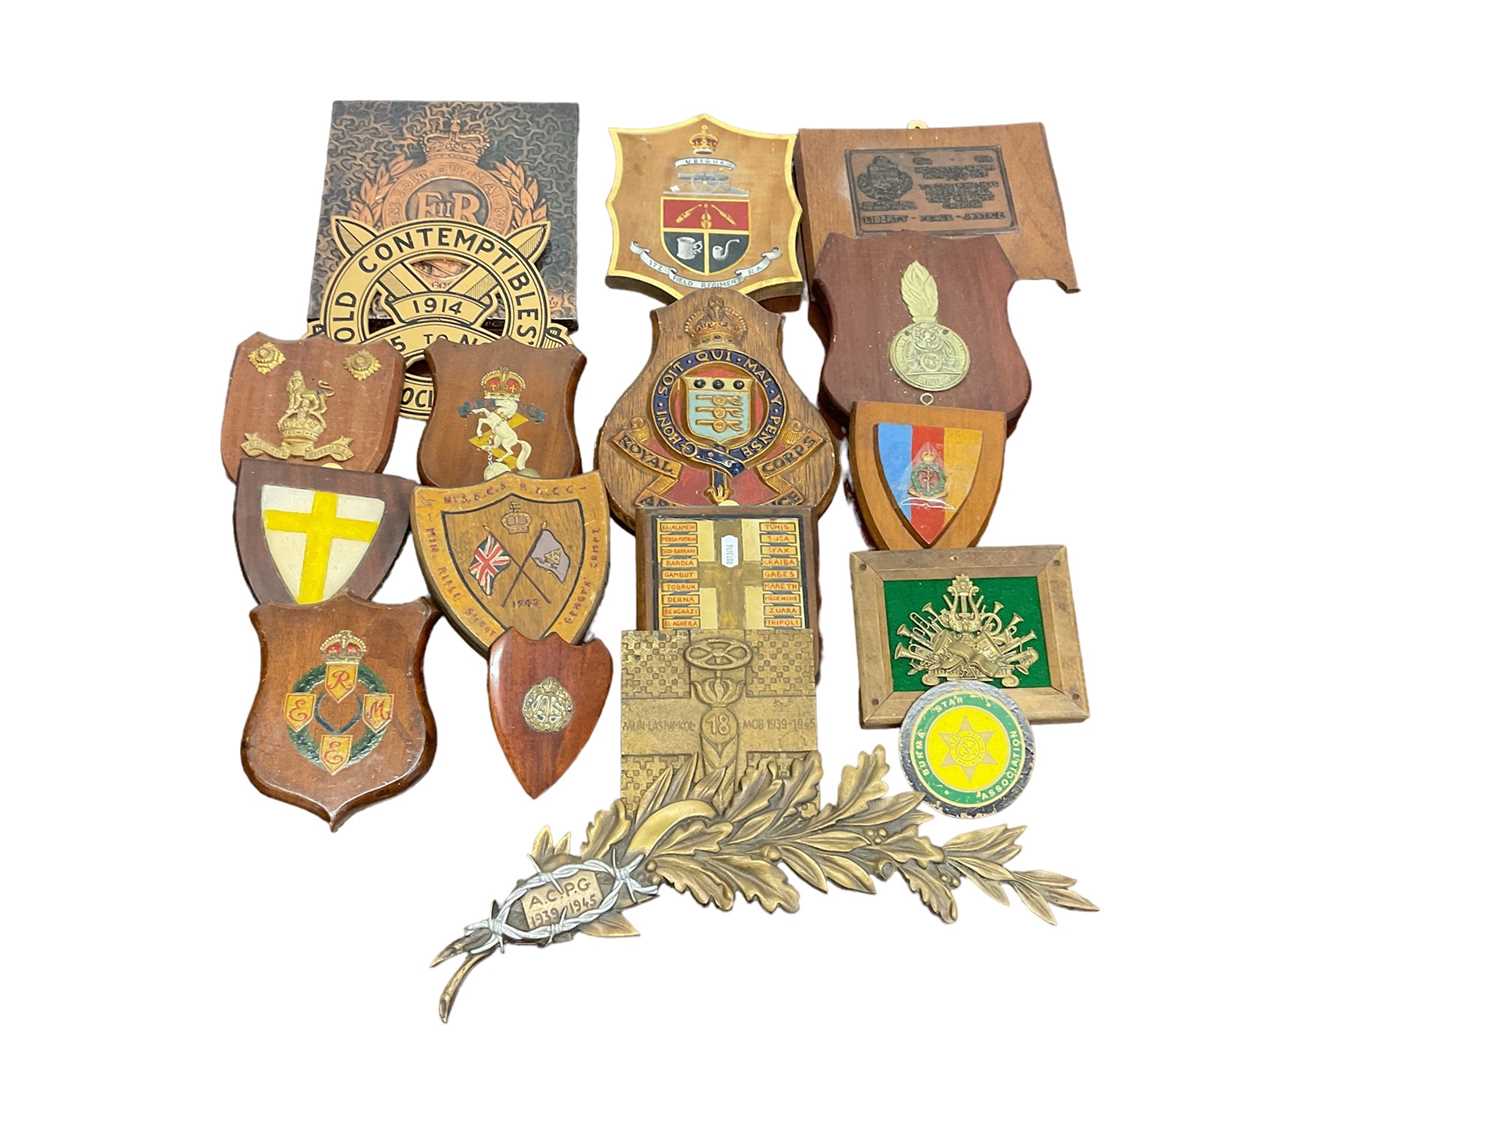 Lot 670 - Collection of old military wall plaques including Regimental and memorial